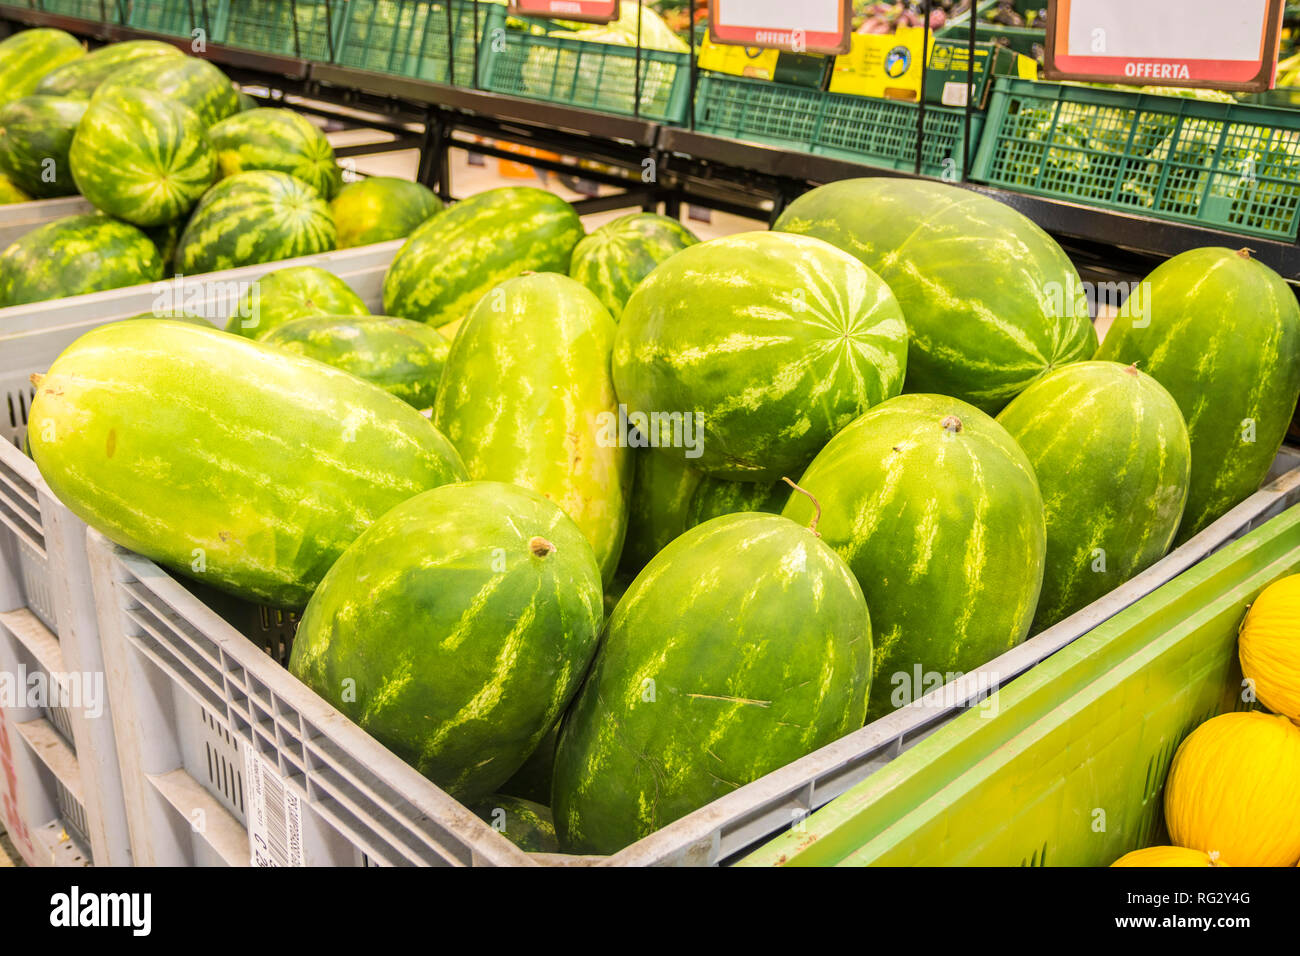 Crate Large Ripe Watermelons, watermelon box, big juicy watermelons, fresh fruit, healthy living concept lifestyle five a day, supermarket stock Stock Photo